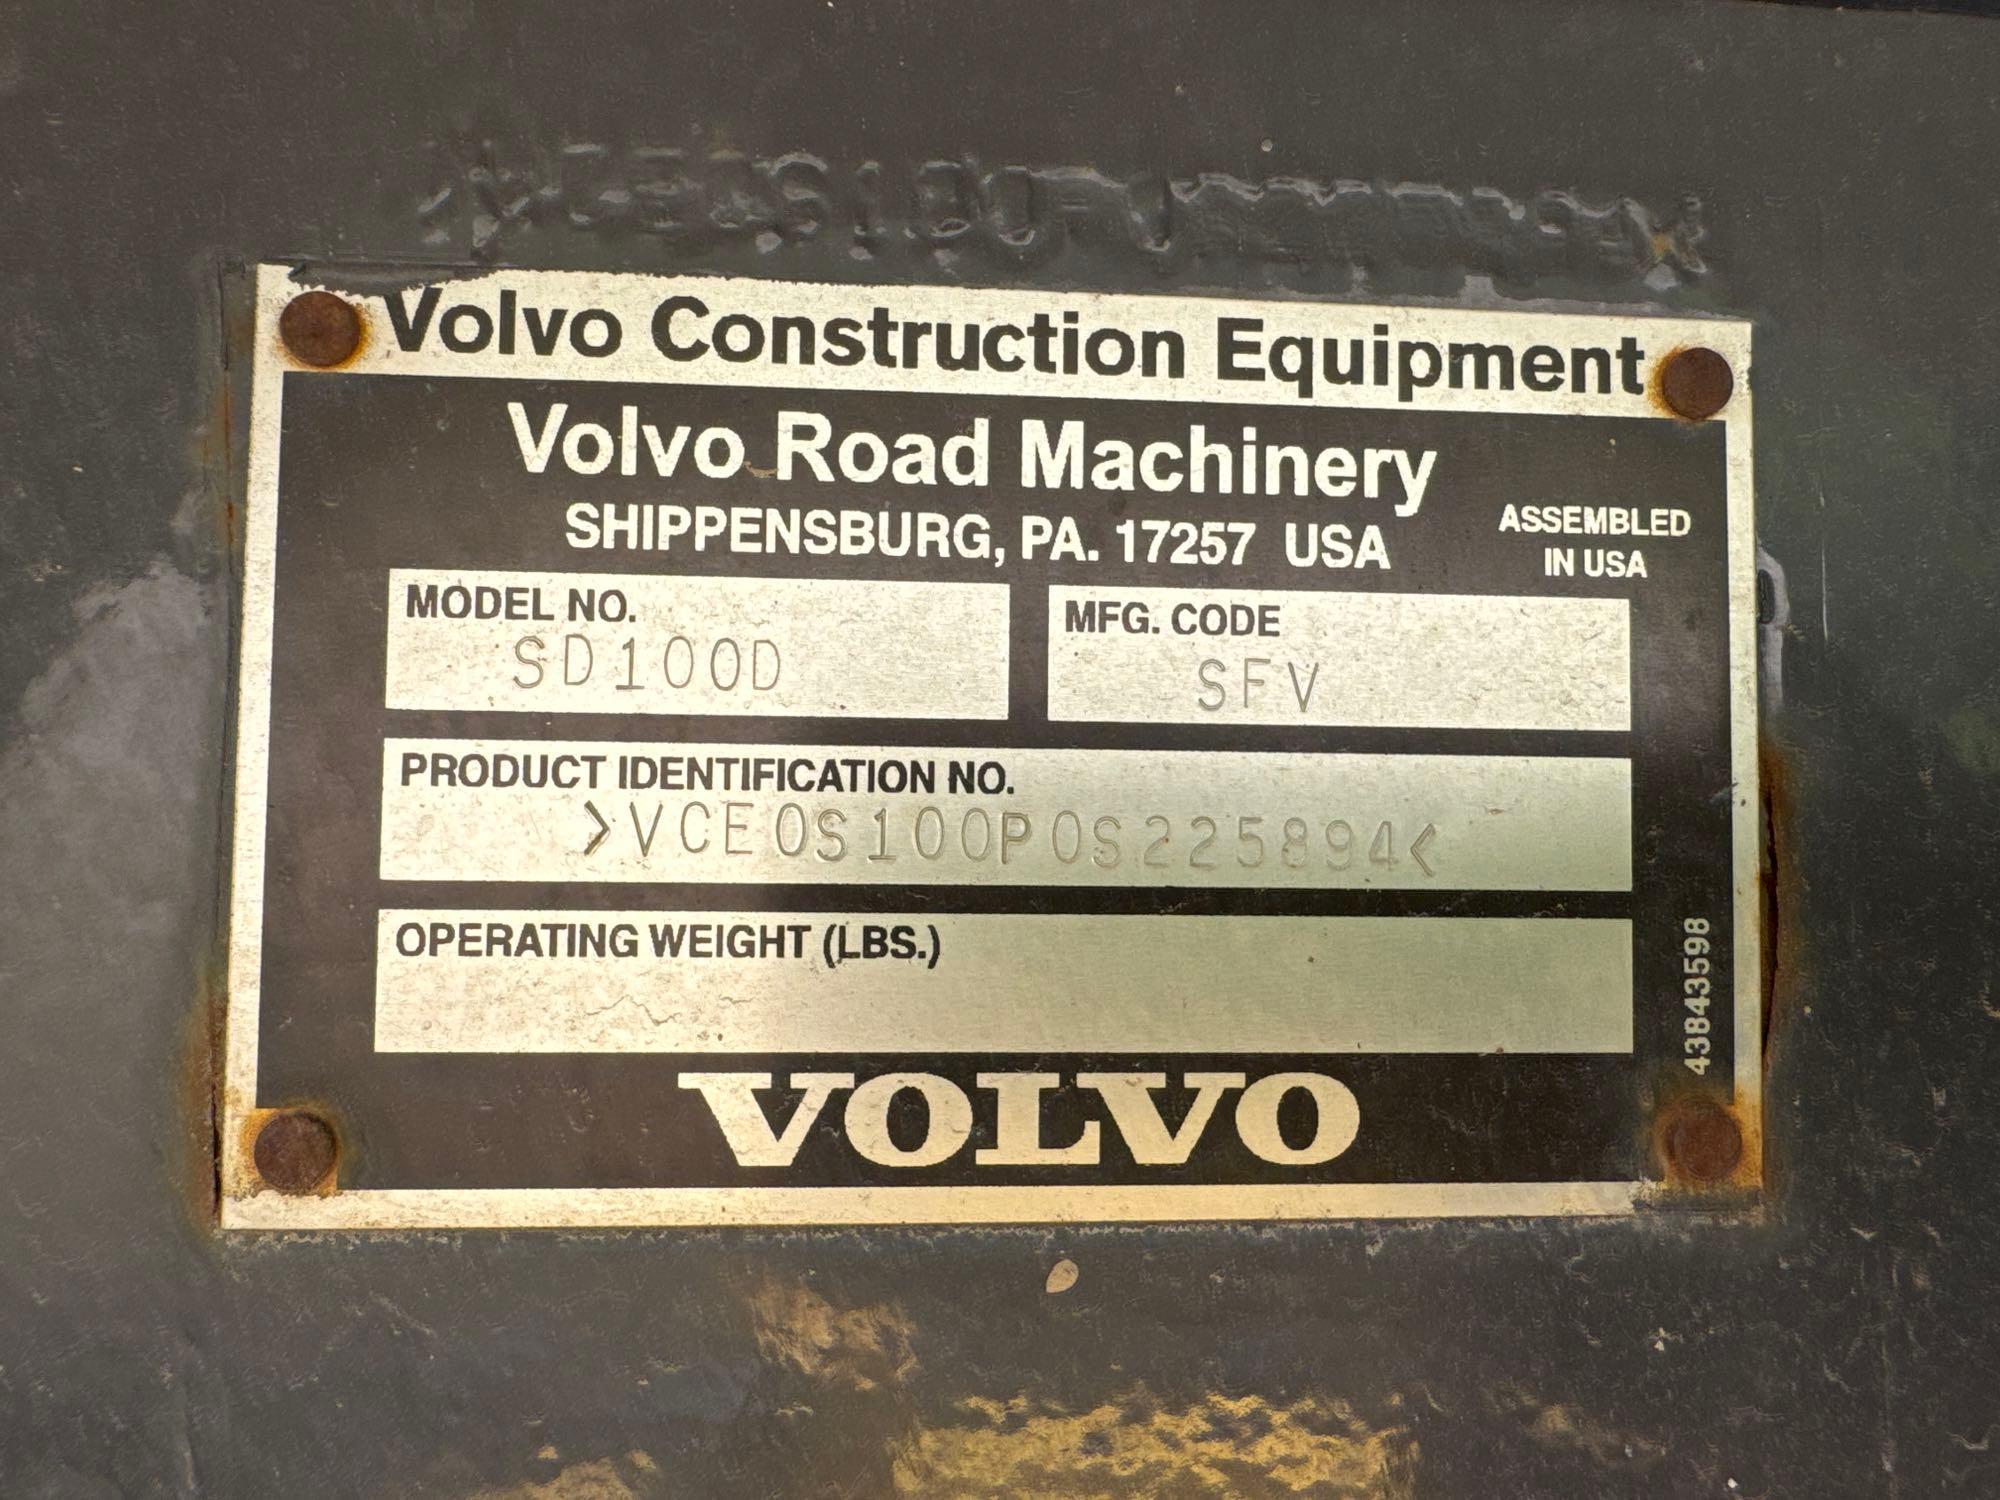 VOLVO SD100D VIBRATORY ROLLER SN:225894 powered by Cummins diesel engine, equipped with OROPS,